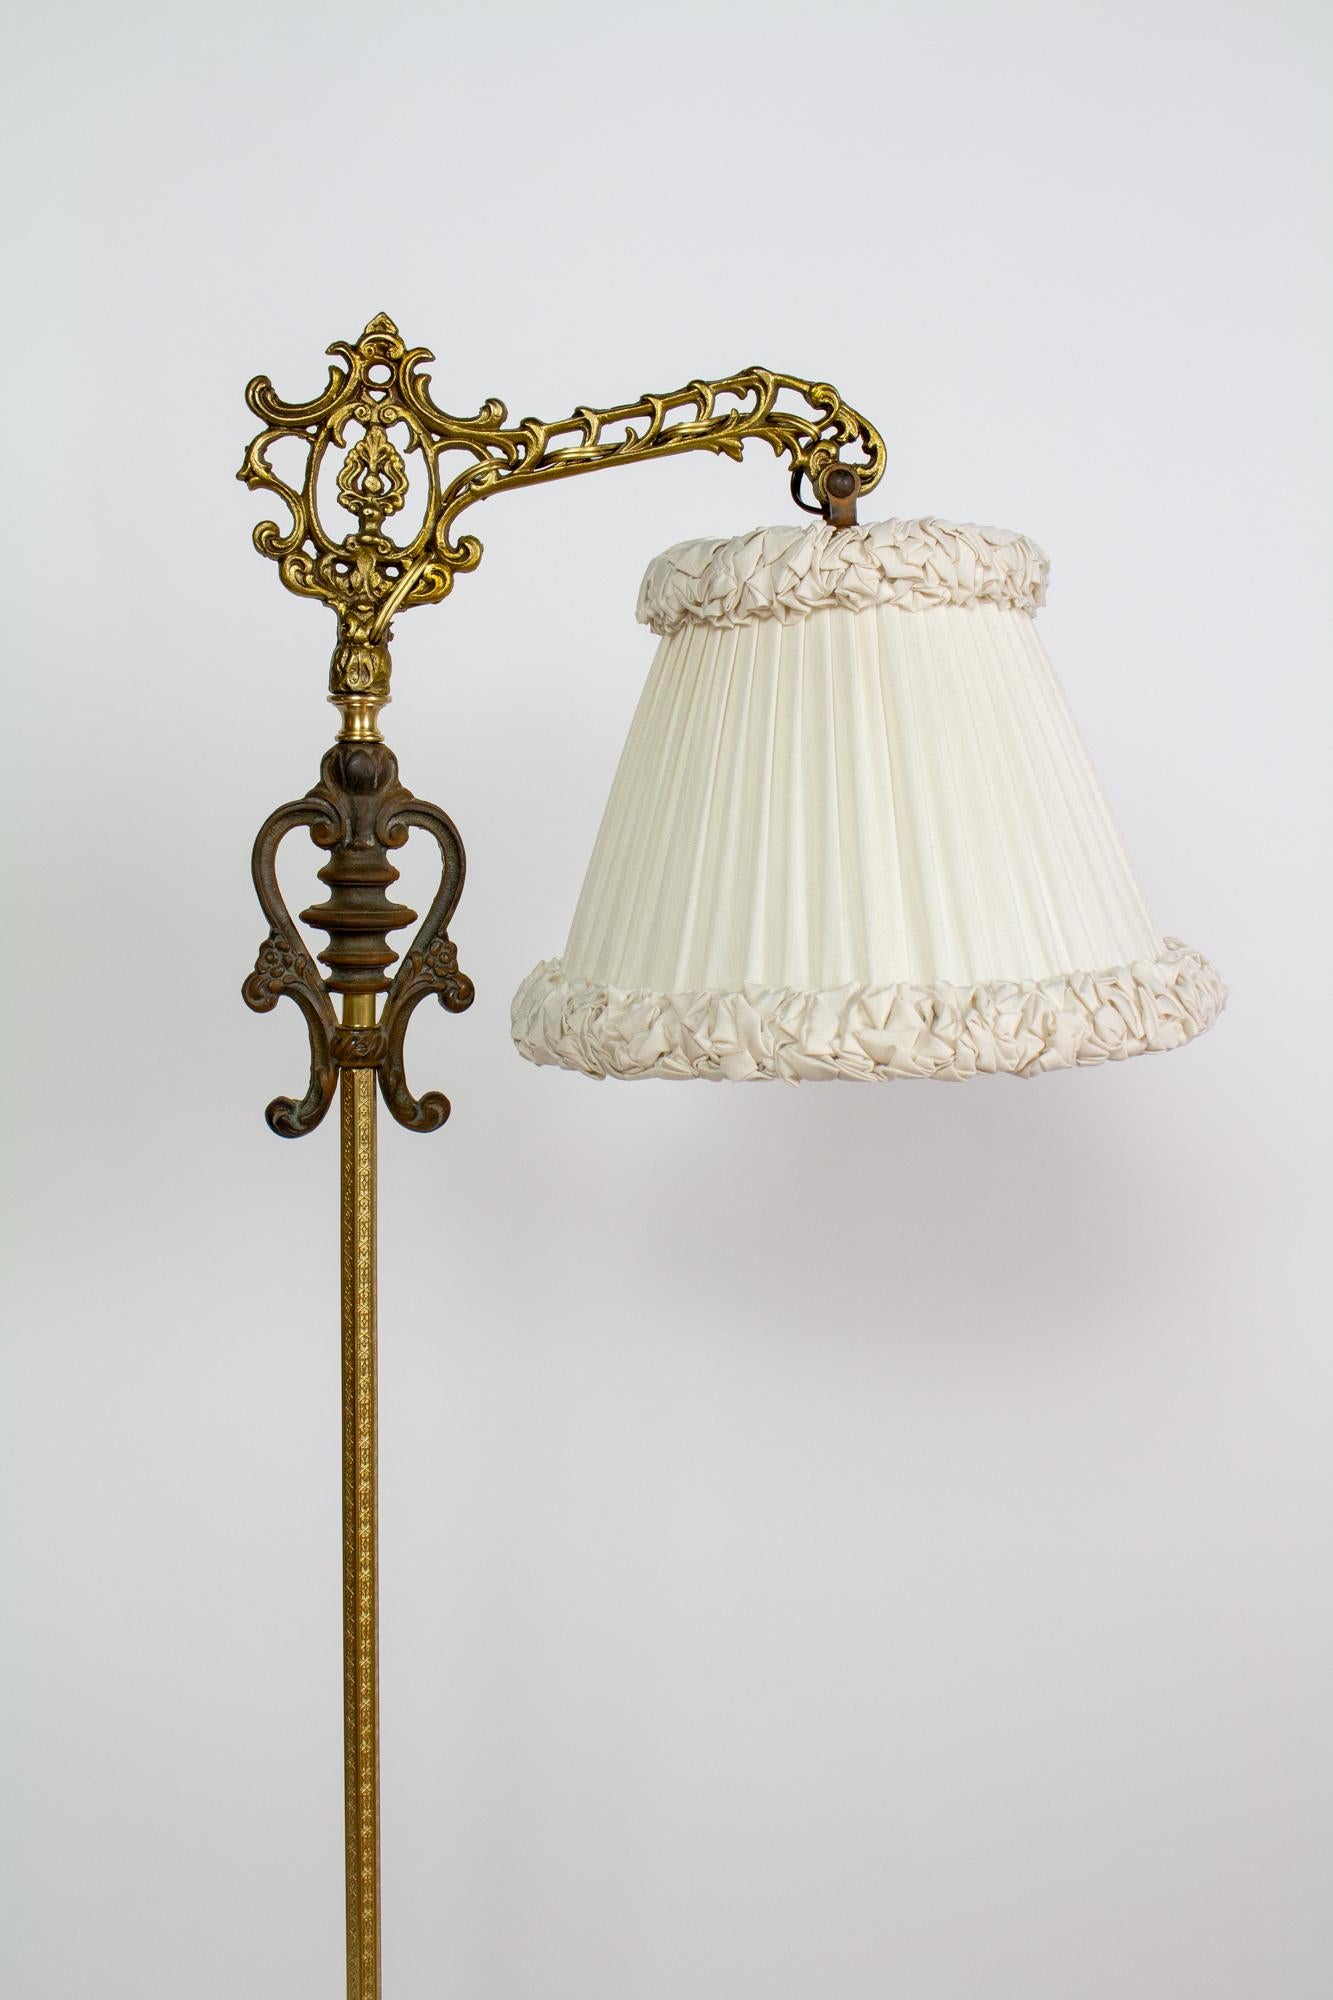 American Ornate Rococo Revival Bridge Lamp with Pleated and Ruched off White Silk Shade For Sale